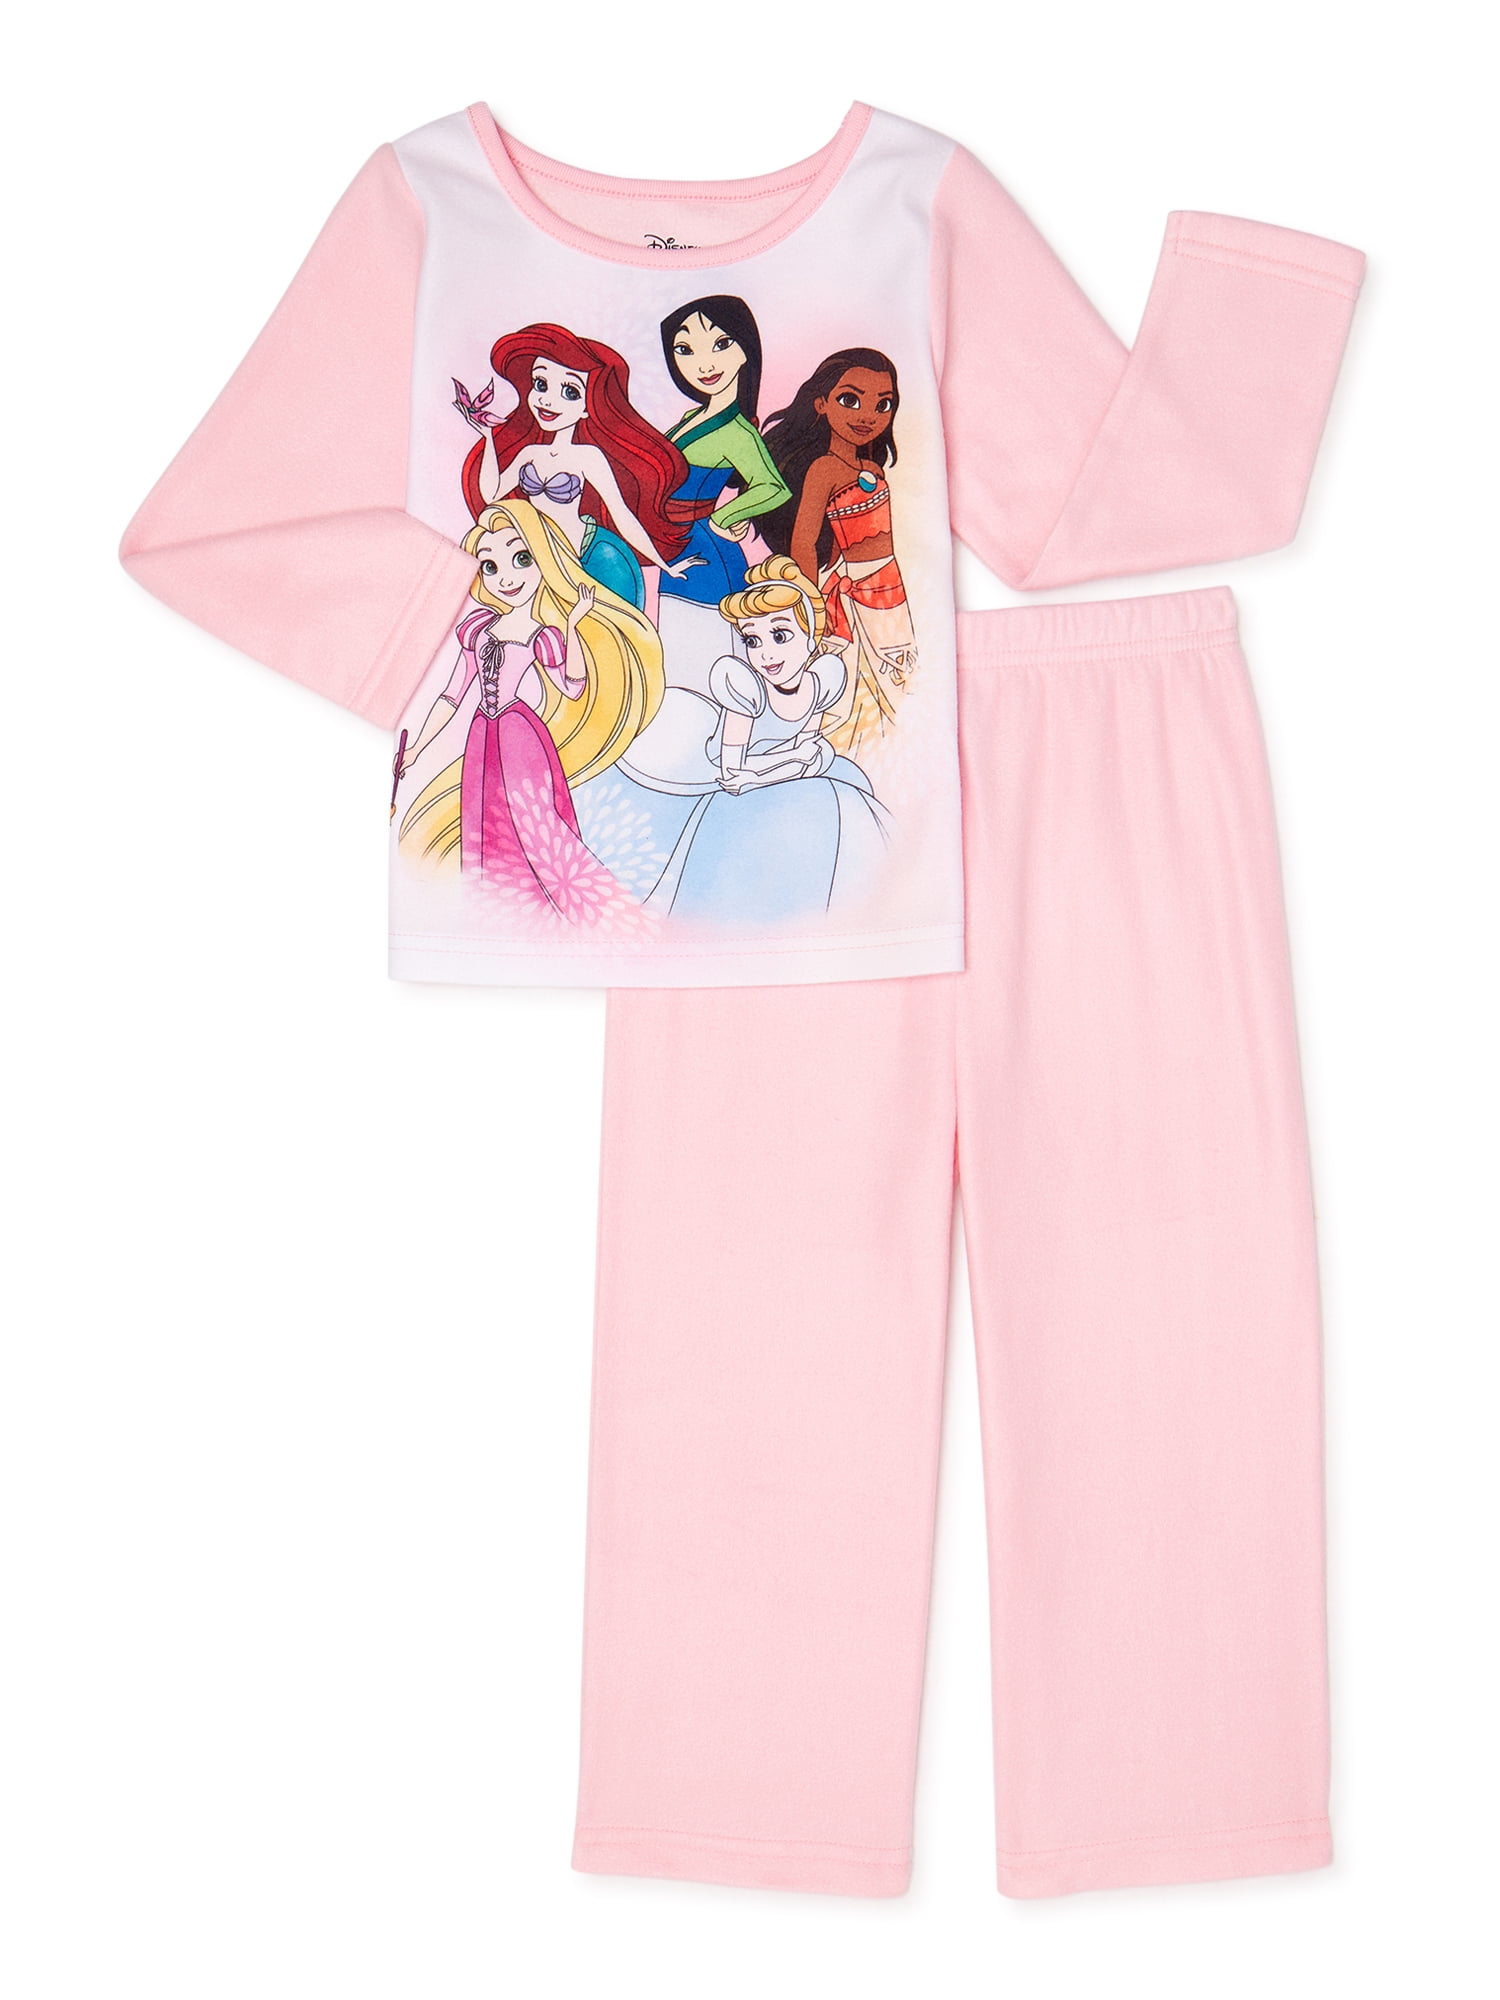 Details about   Disney Princess Pink One Piece Footed Pajama PJ Girls Size 4T NWT 